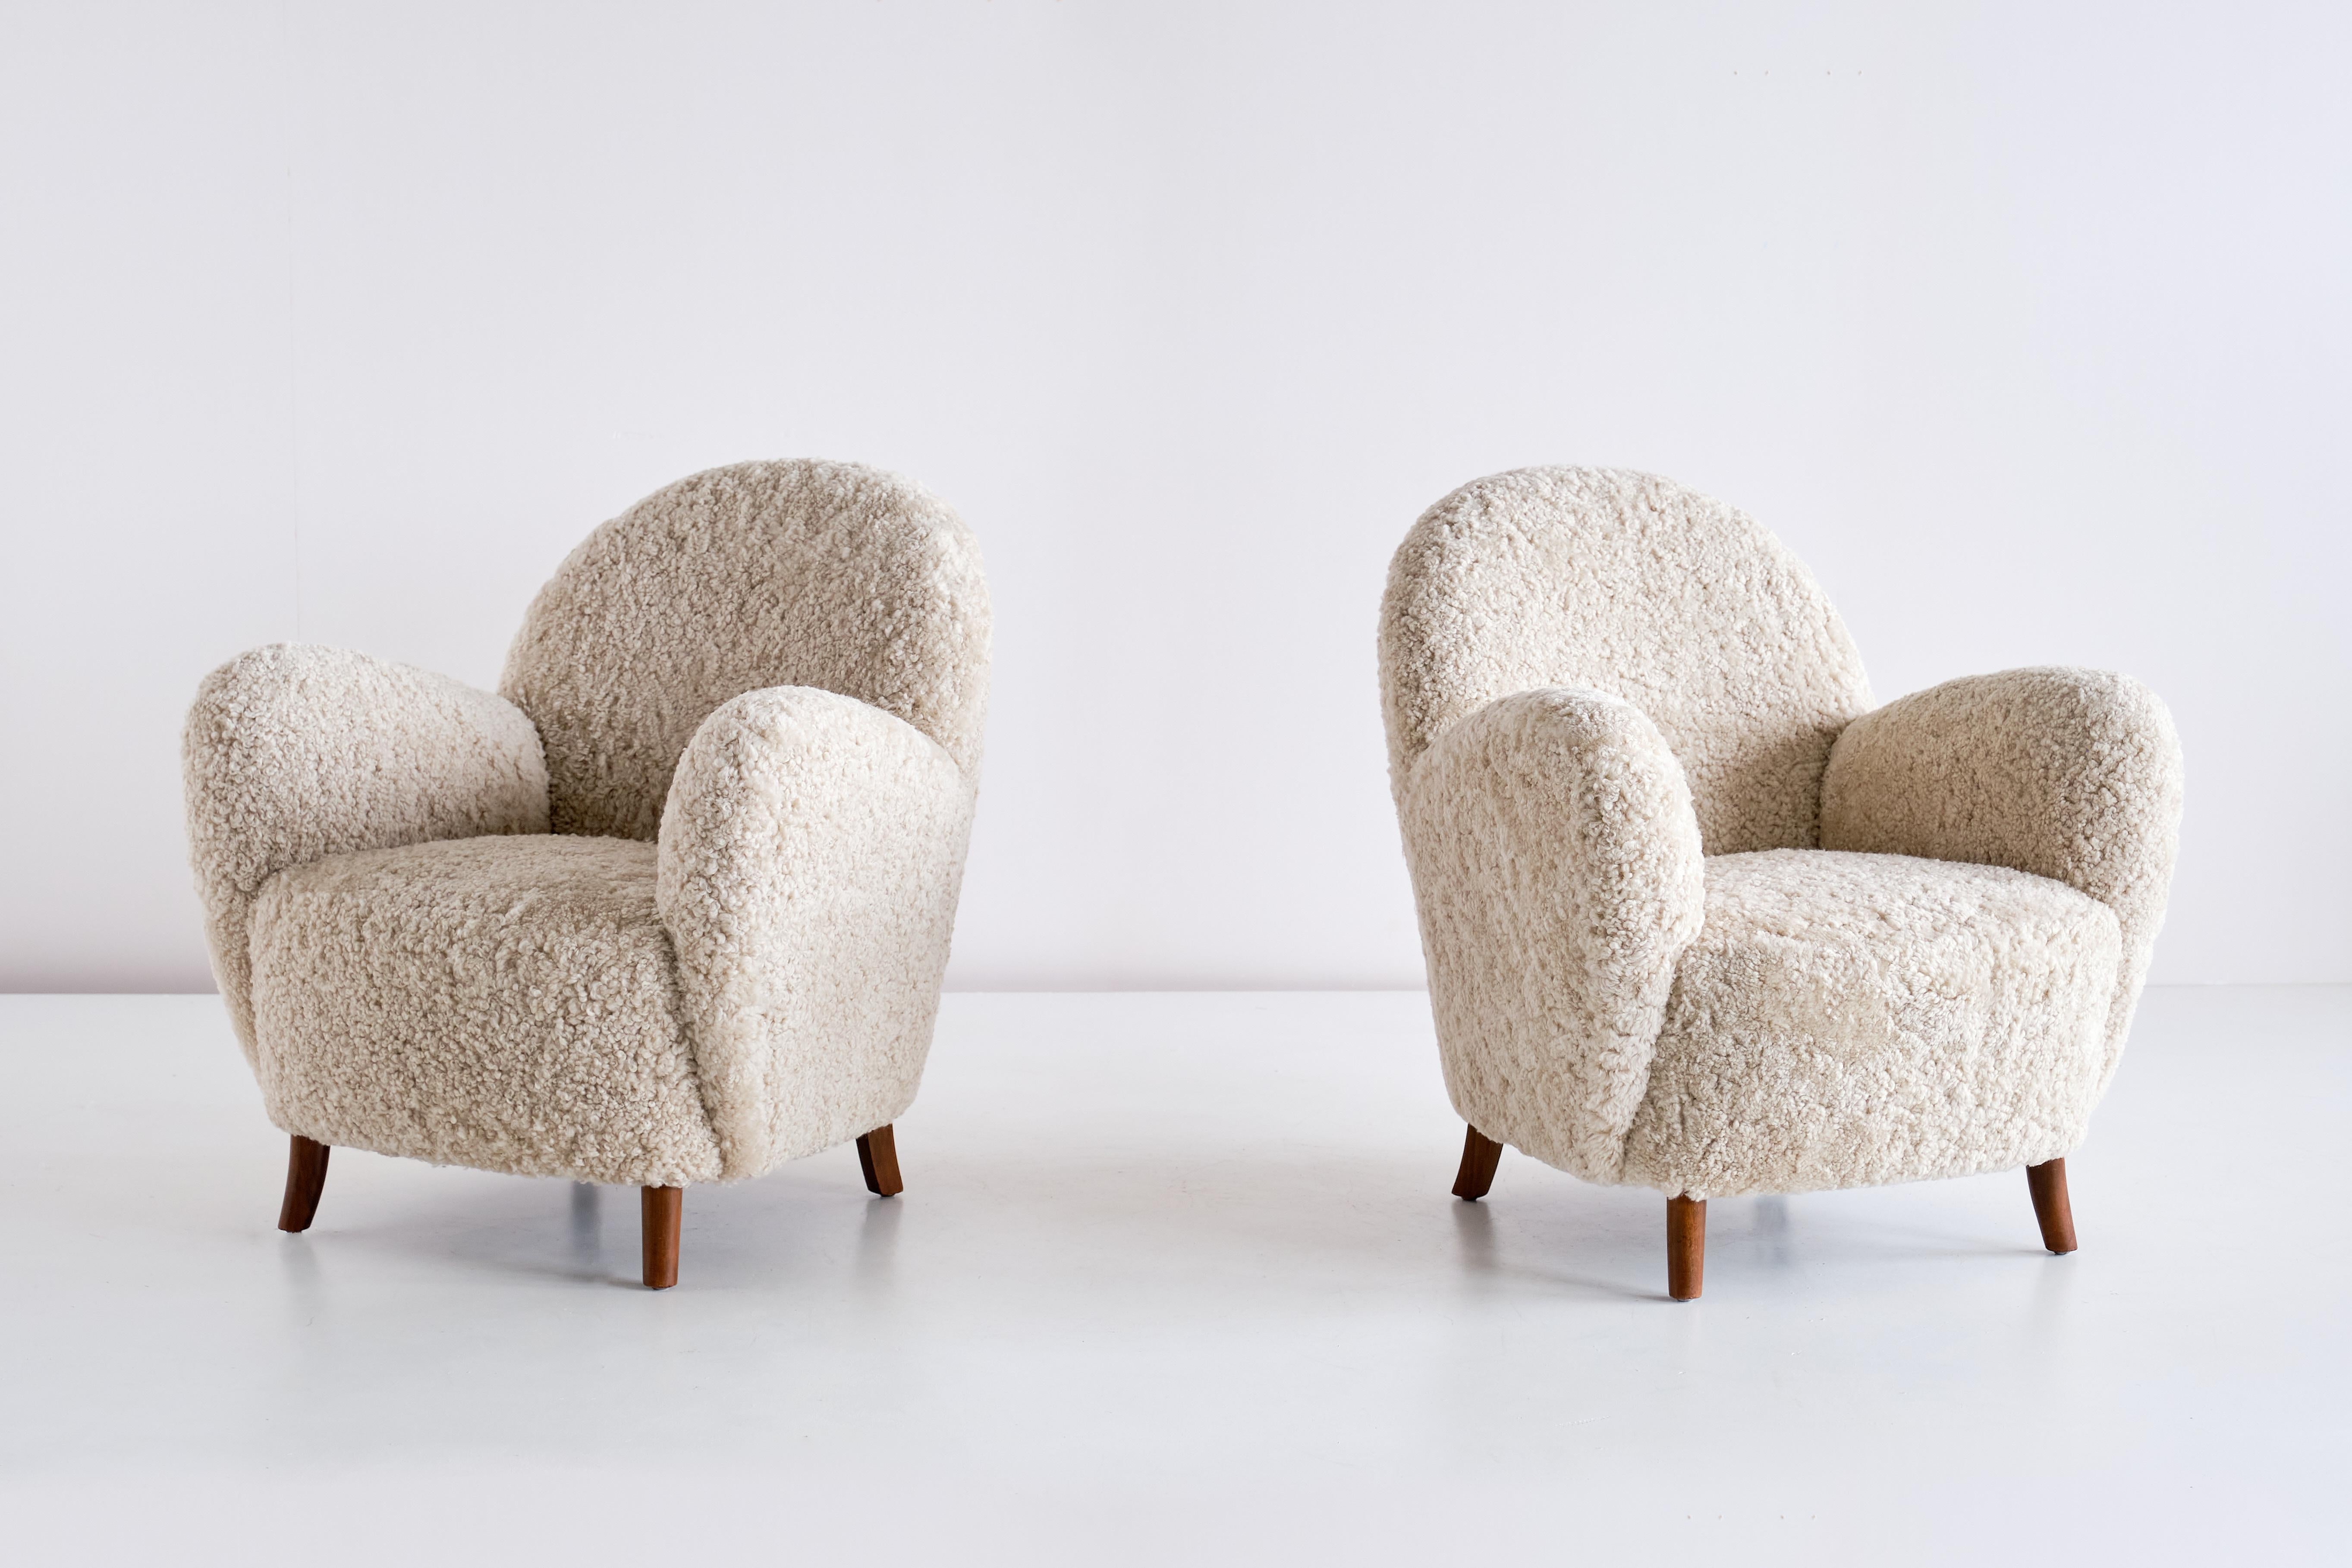 Scandinavian Modern Pair of Thorald Madsen Armchairs in Sheepskin and Beech, Denmark, Mid 1930s For Sale